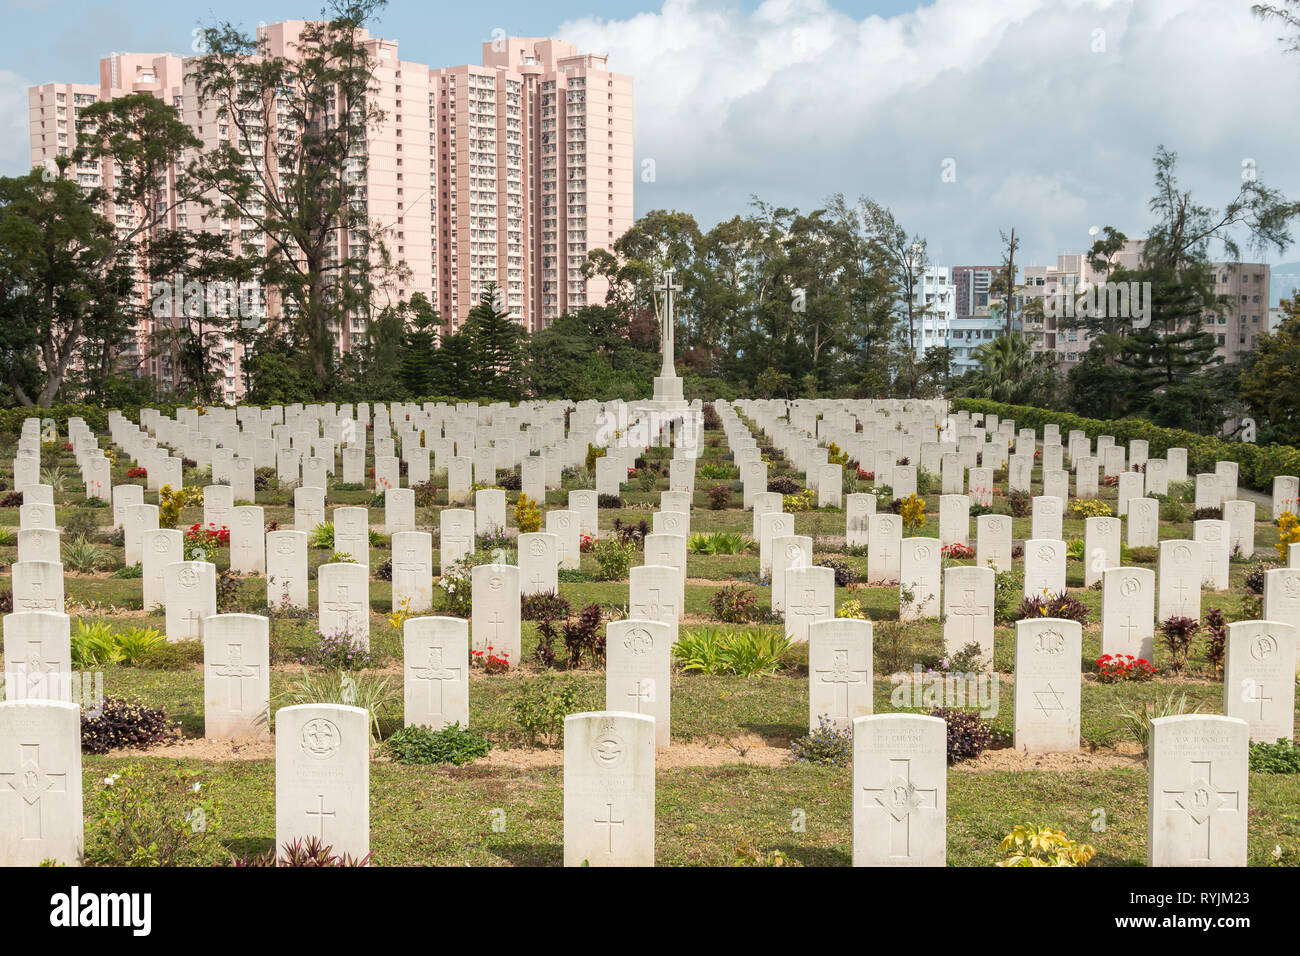 Sai Wan War Cemetery, a military graveyard in Chai Wan, Hong Kong, maintained by the Commonwealth War Graves Commission (CWGC). Stock Photo